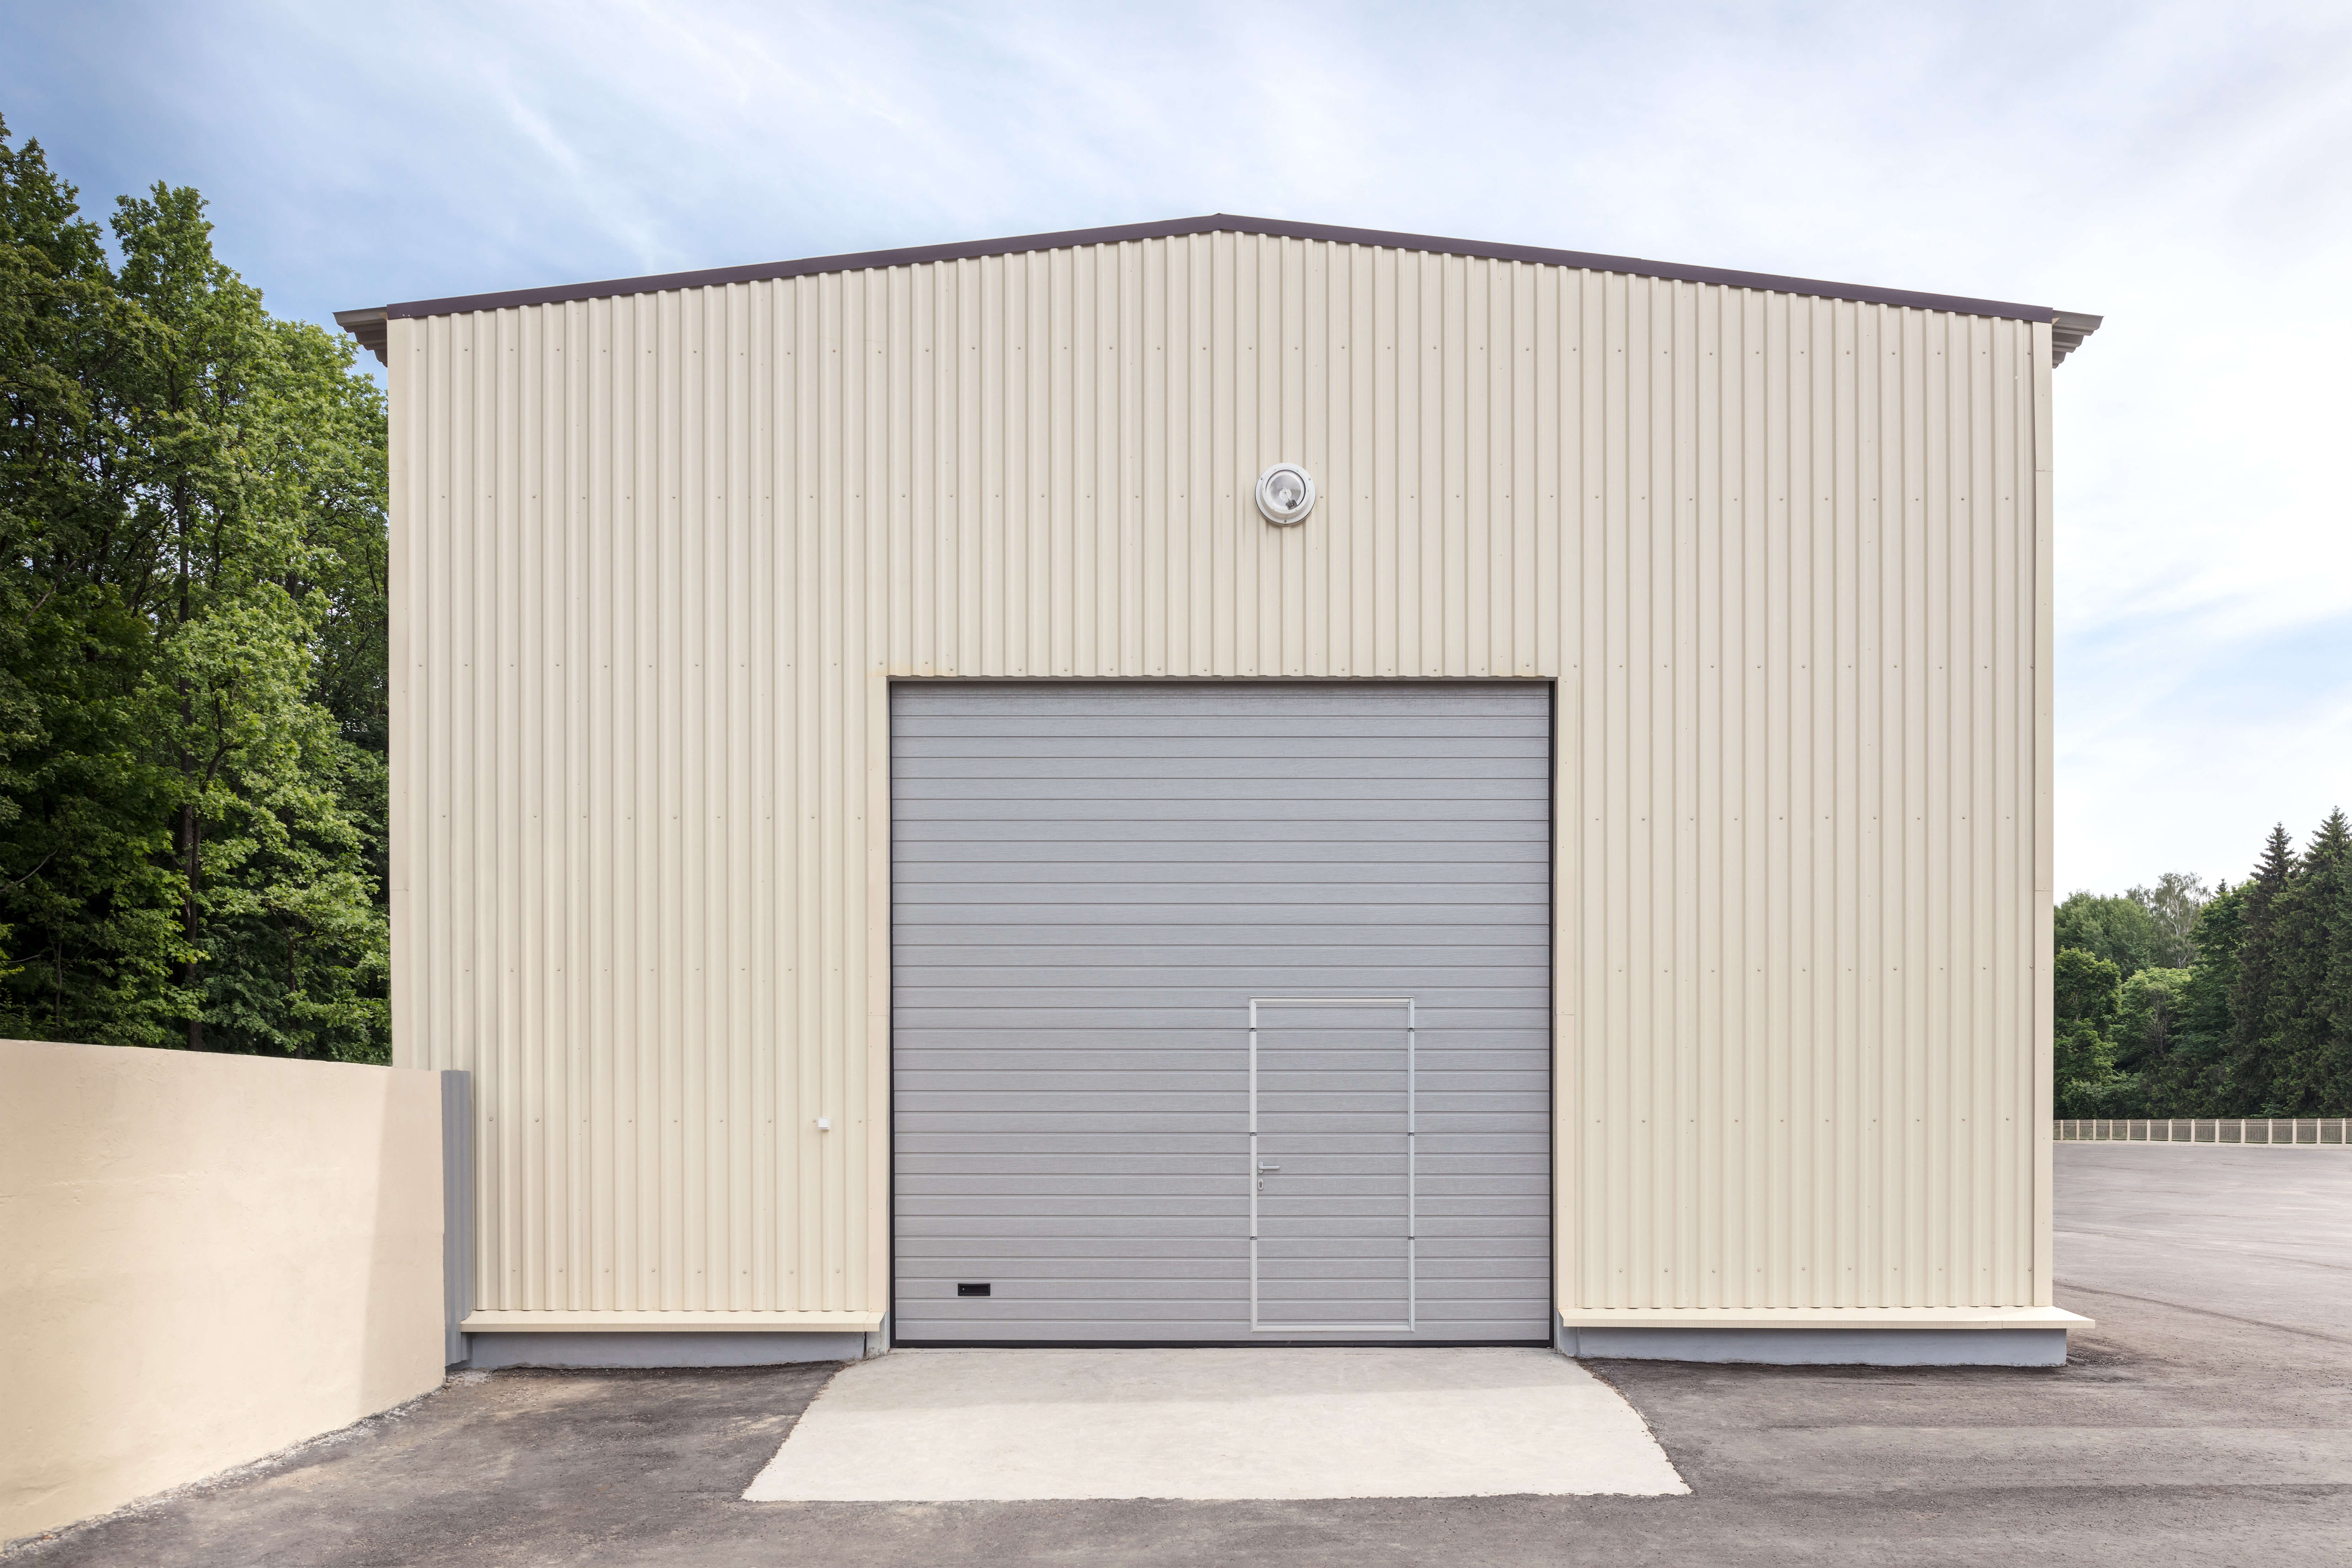 industrial storehouse with closed gray metal gate